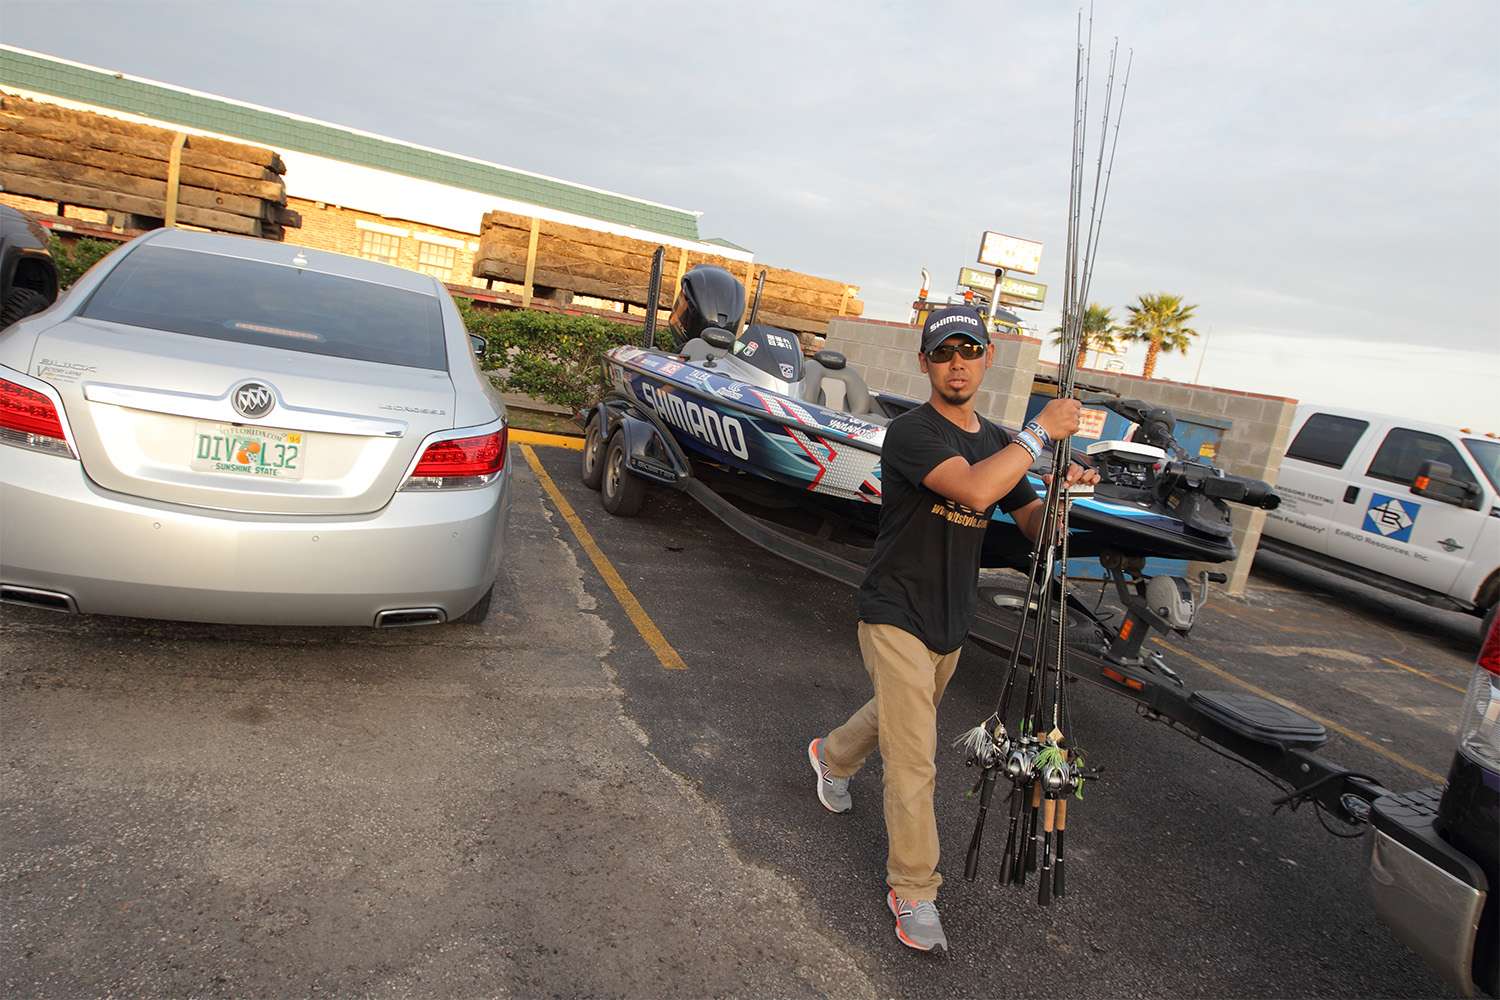 His first official practice day of the 2015 Bassmaster Elite Series is in the book.